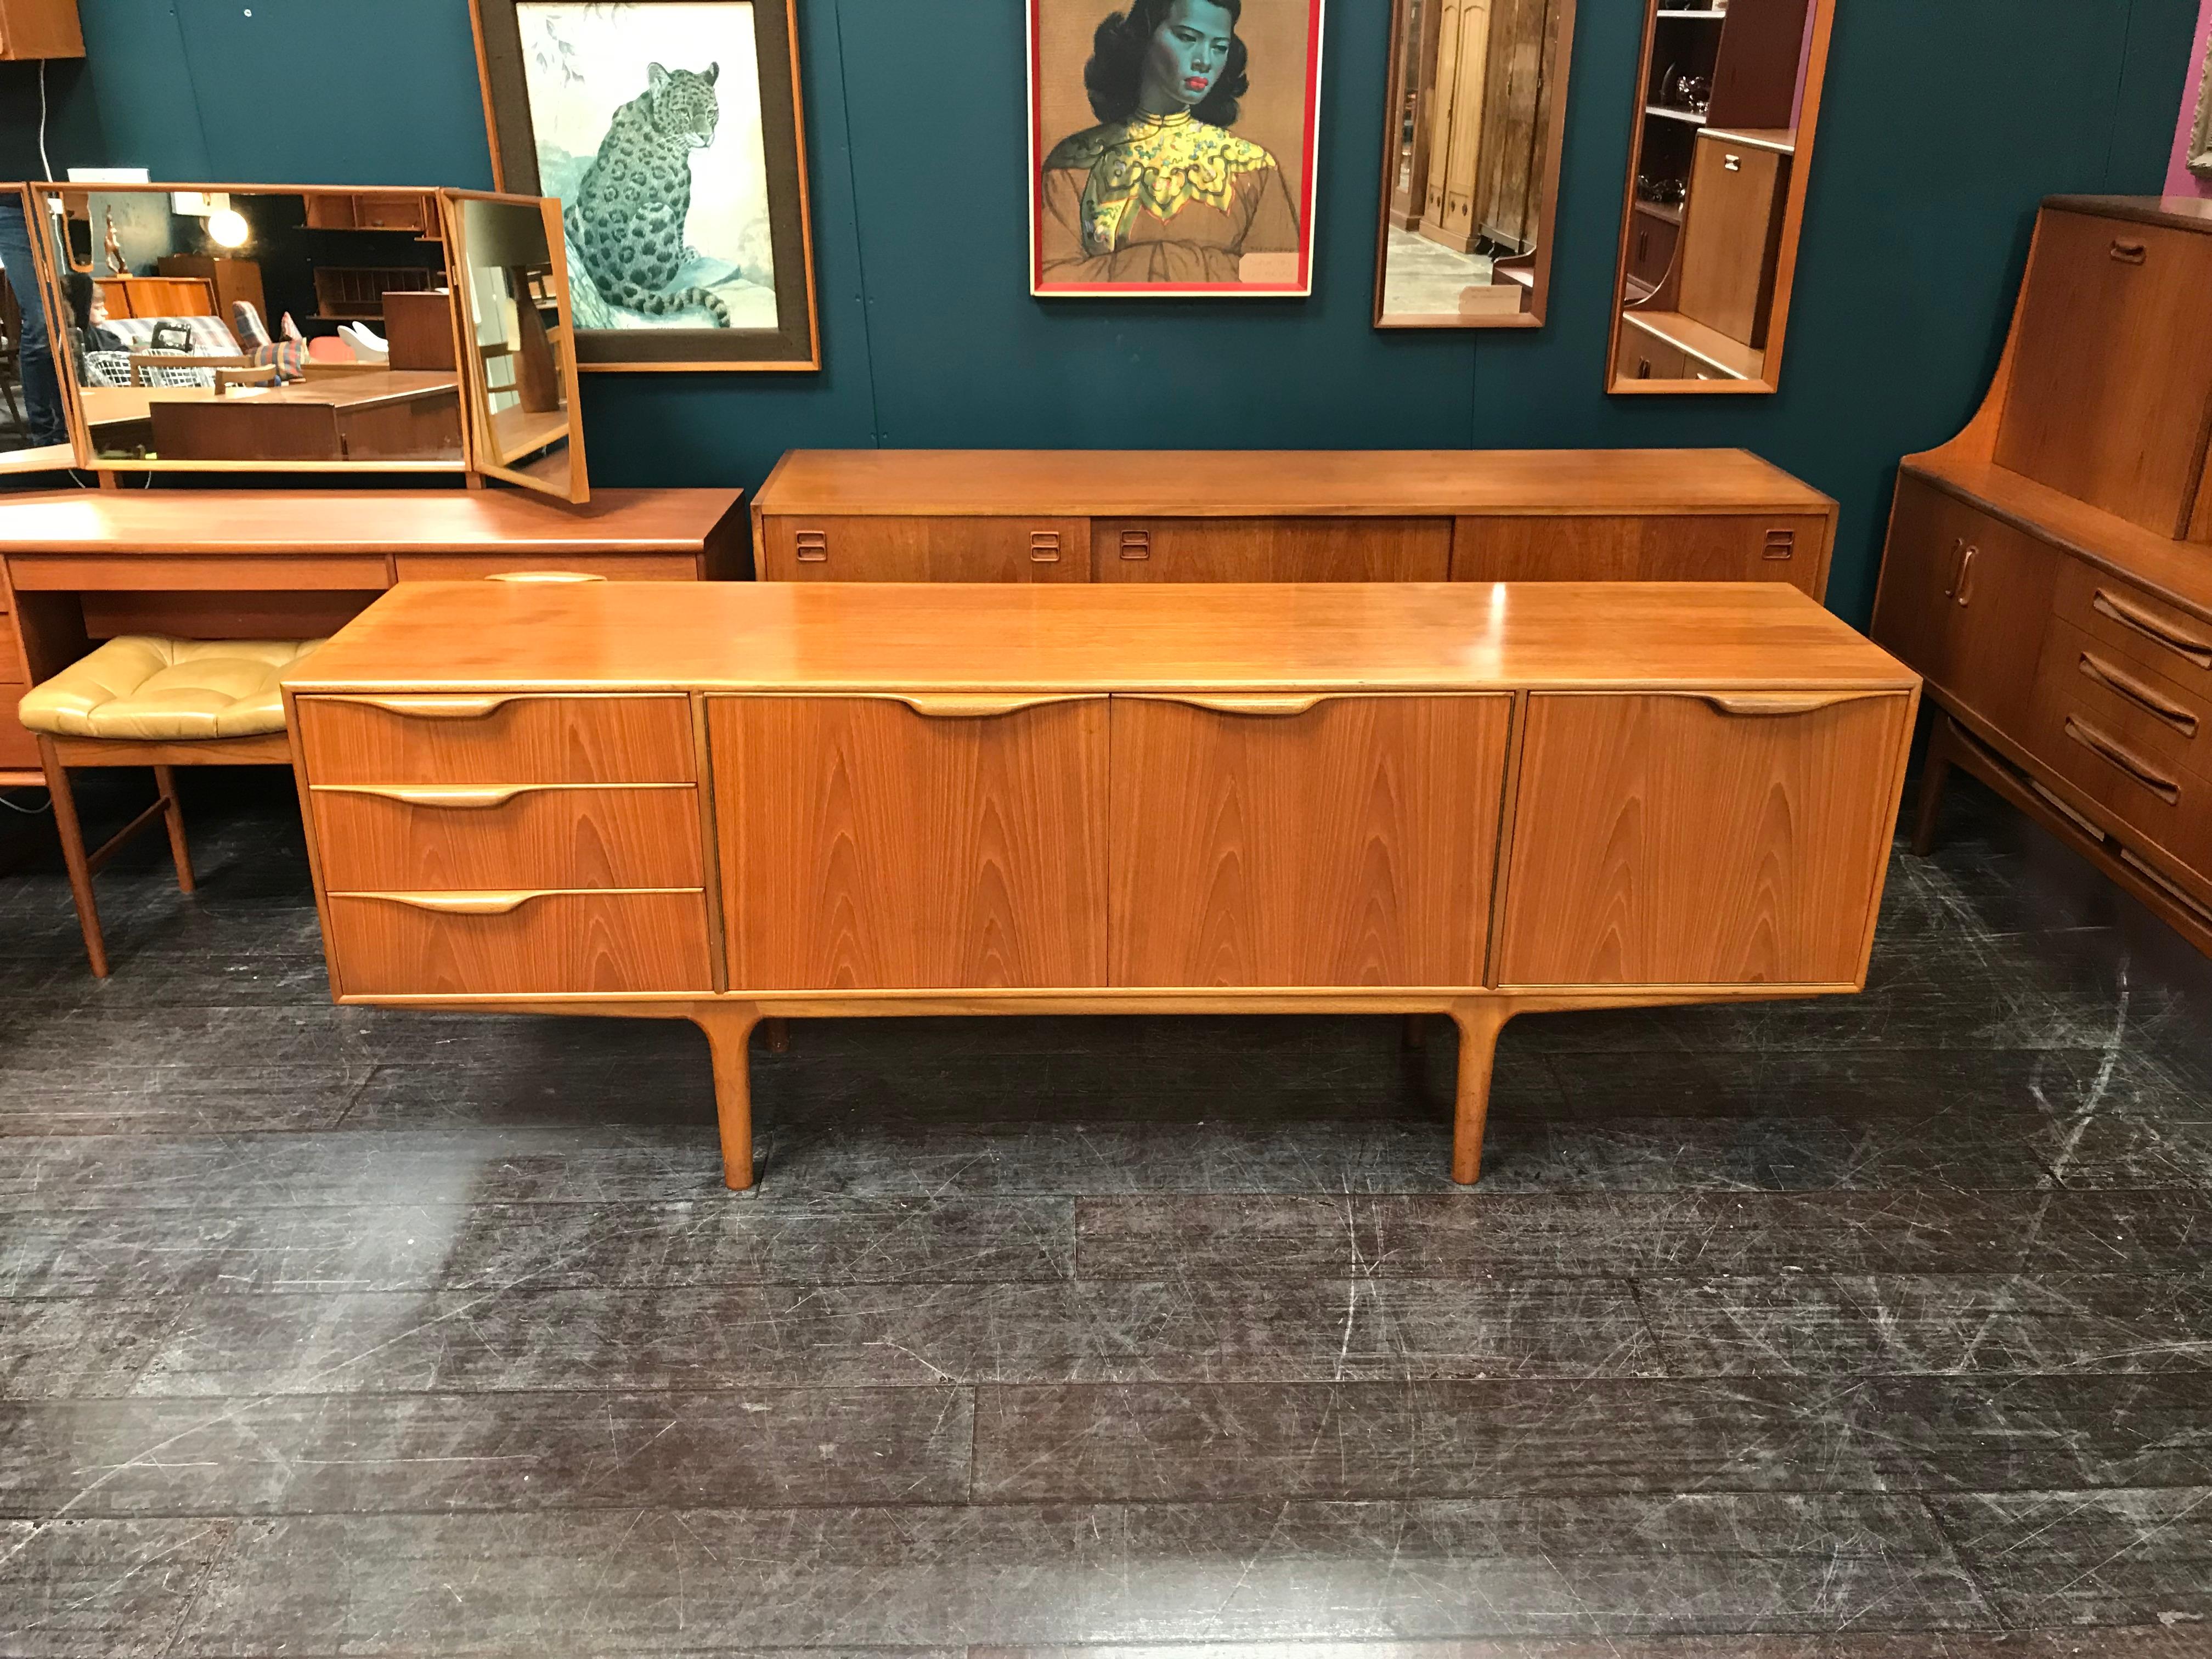 A vintage teak Dunvegan sideboard designed by Tom Robertson and manufactured by A.H. McIntosh of Kirkcaldy in the 1960s. This classic piece of mid century Scottish furniture features extensive storage with a double large shelved cupboard and drawers